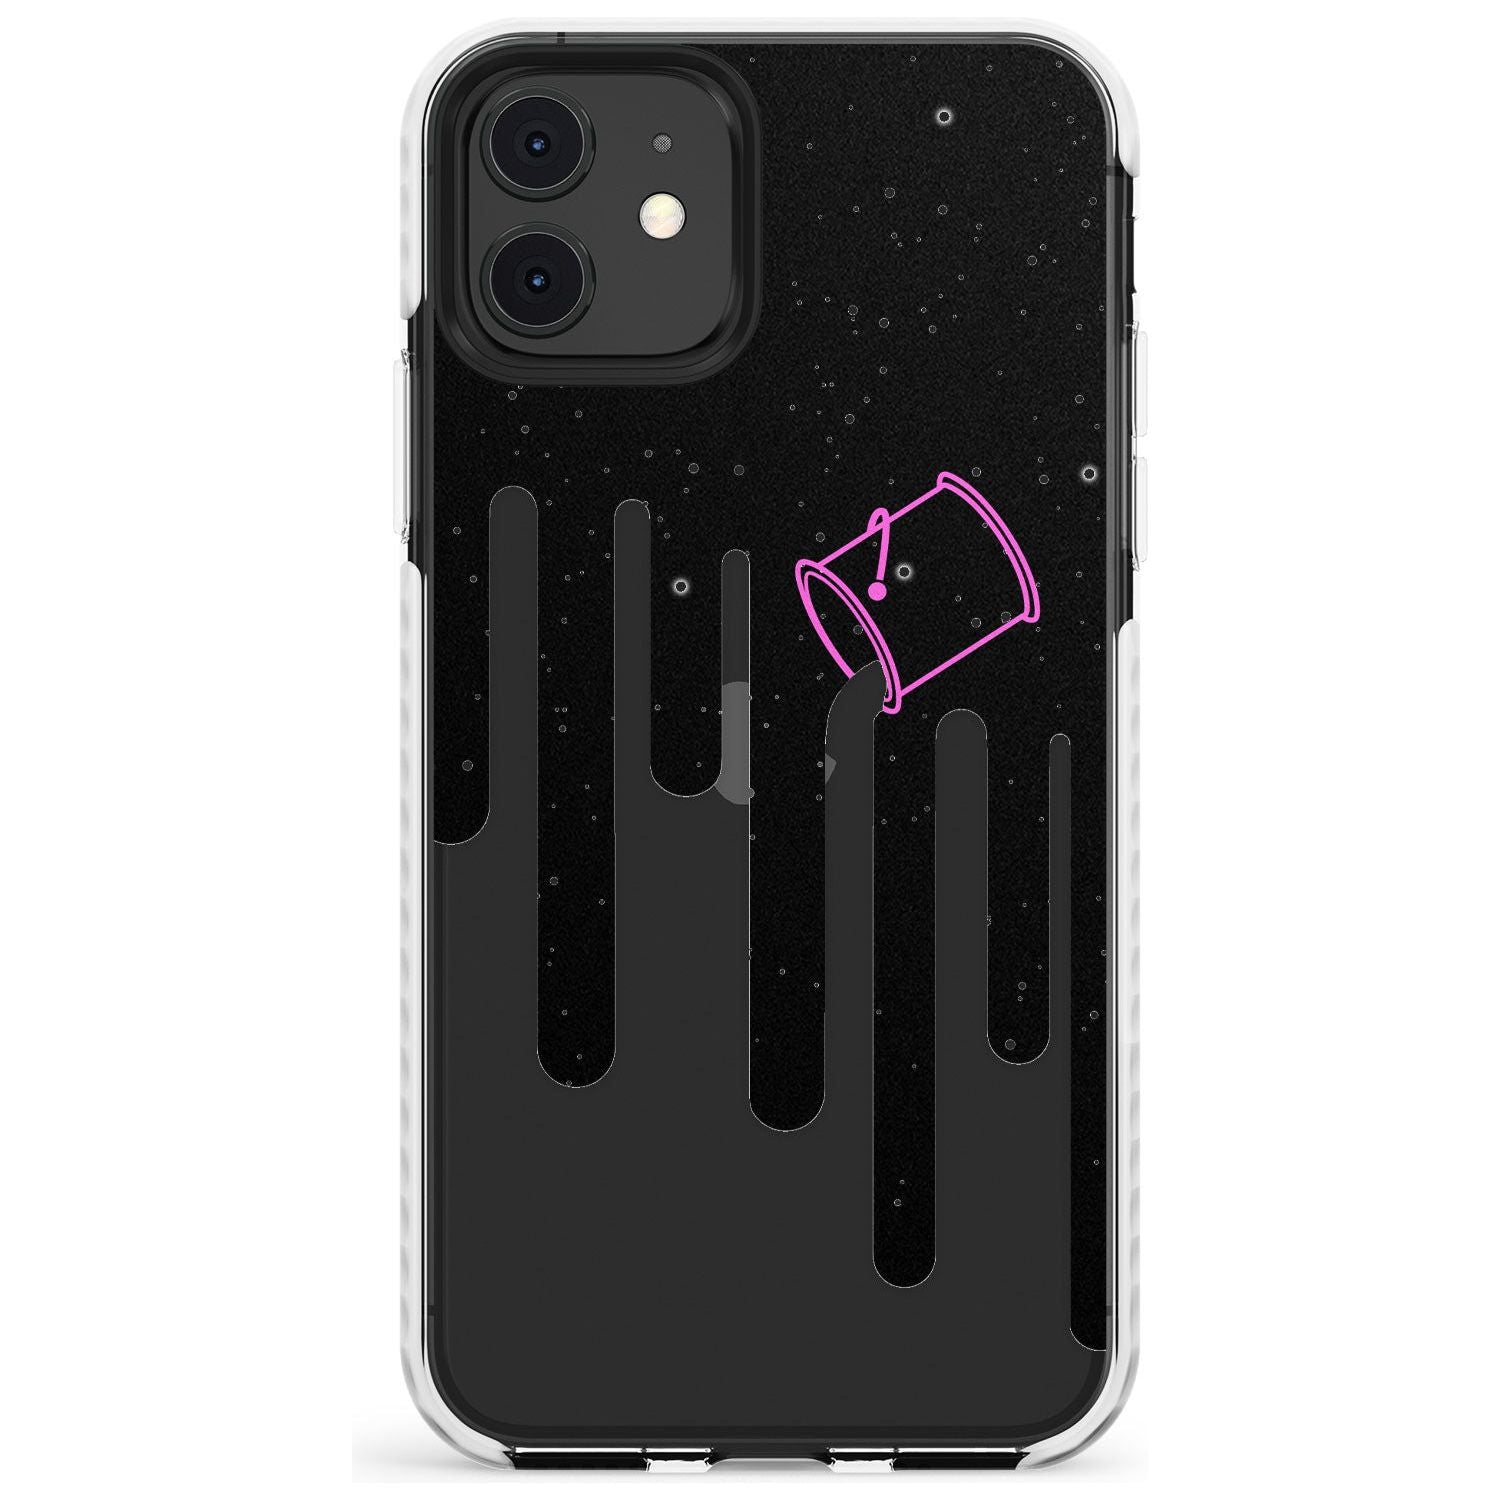 Space Bucket Slim TPU Phone Case for iPhone 11